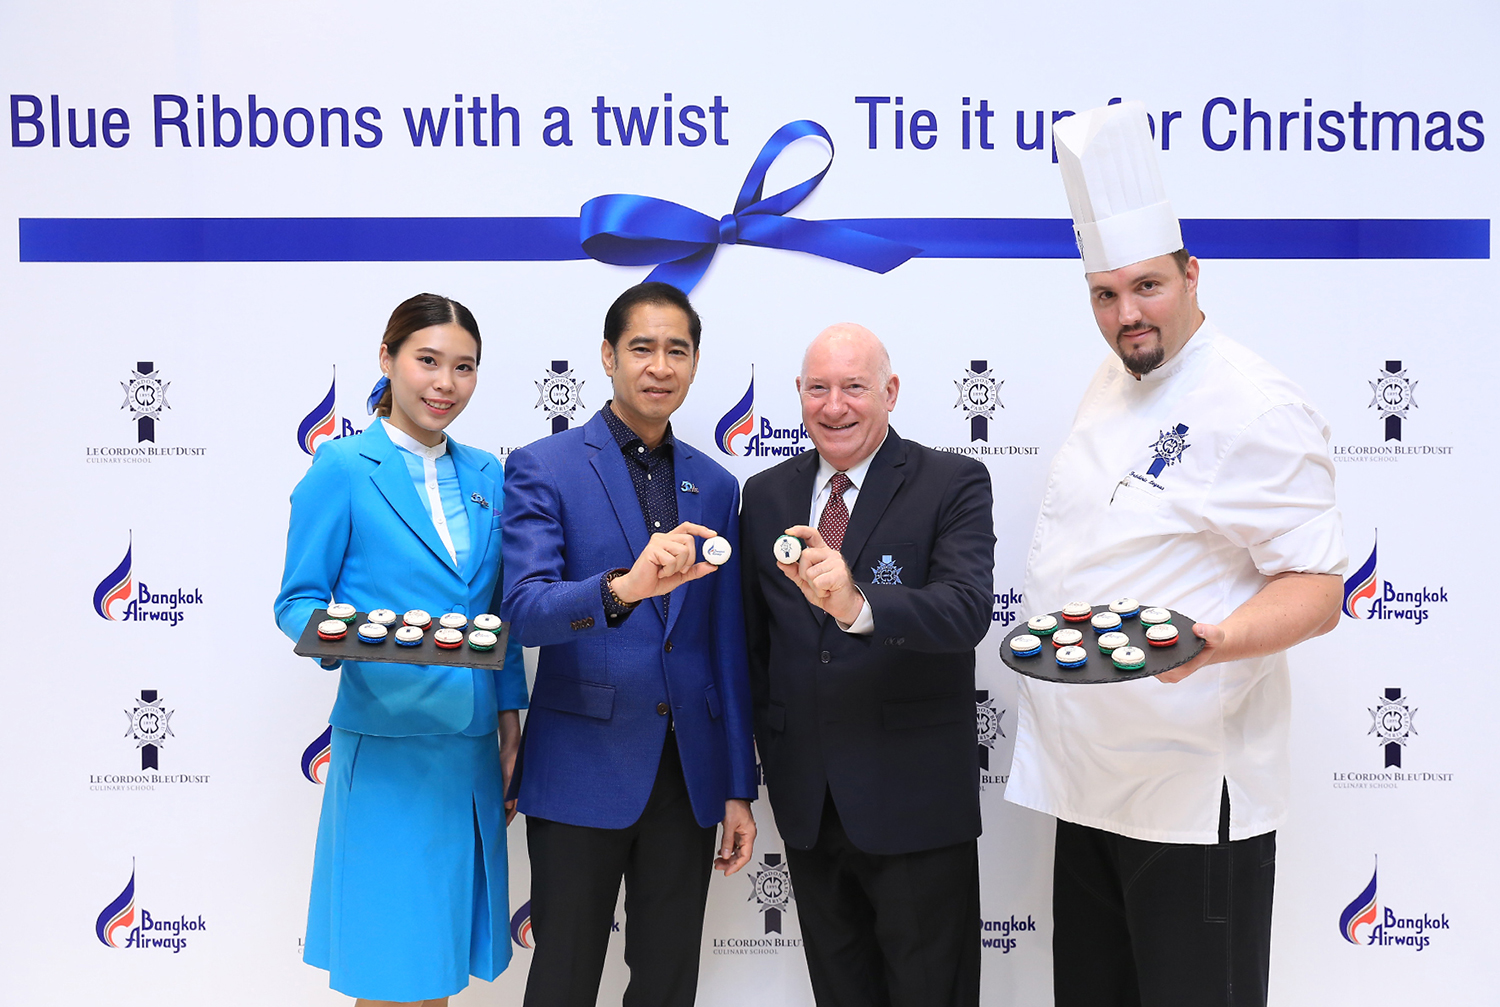 Bangkok-Airways-and-Le-Cordon-Bleu-Dusit-Launches-Blue-Ribbons-with-a-twist---Tie-it-up-for-Christmas-Campaign